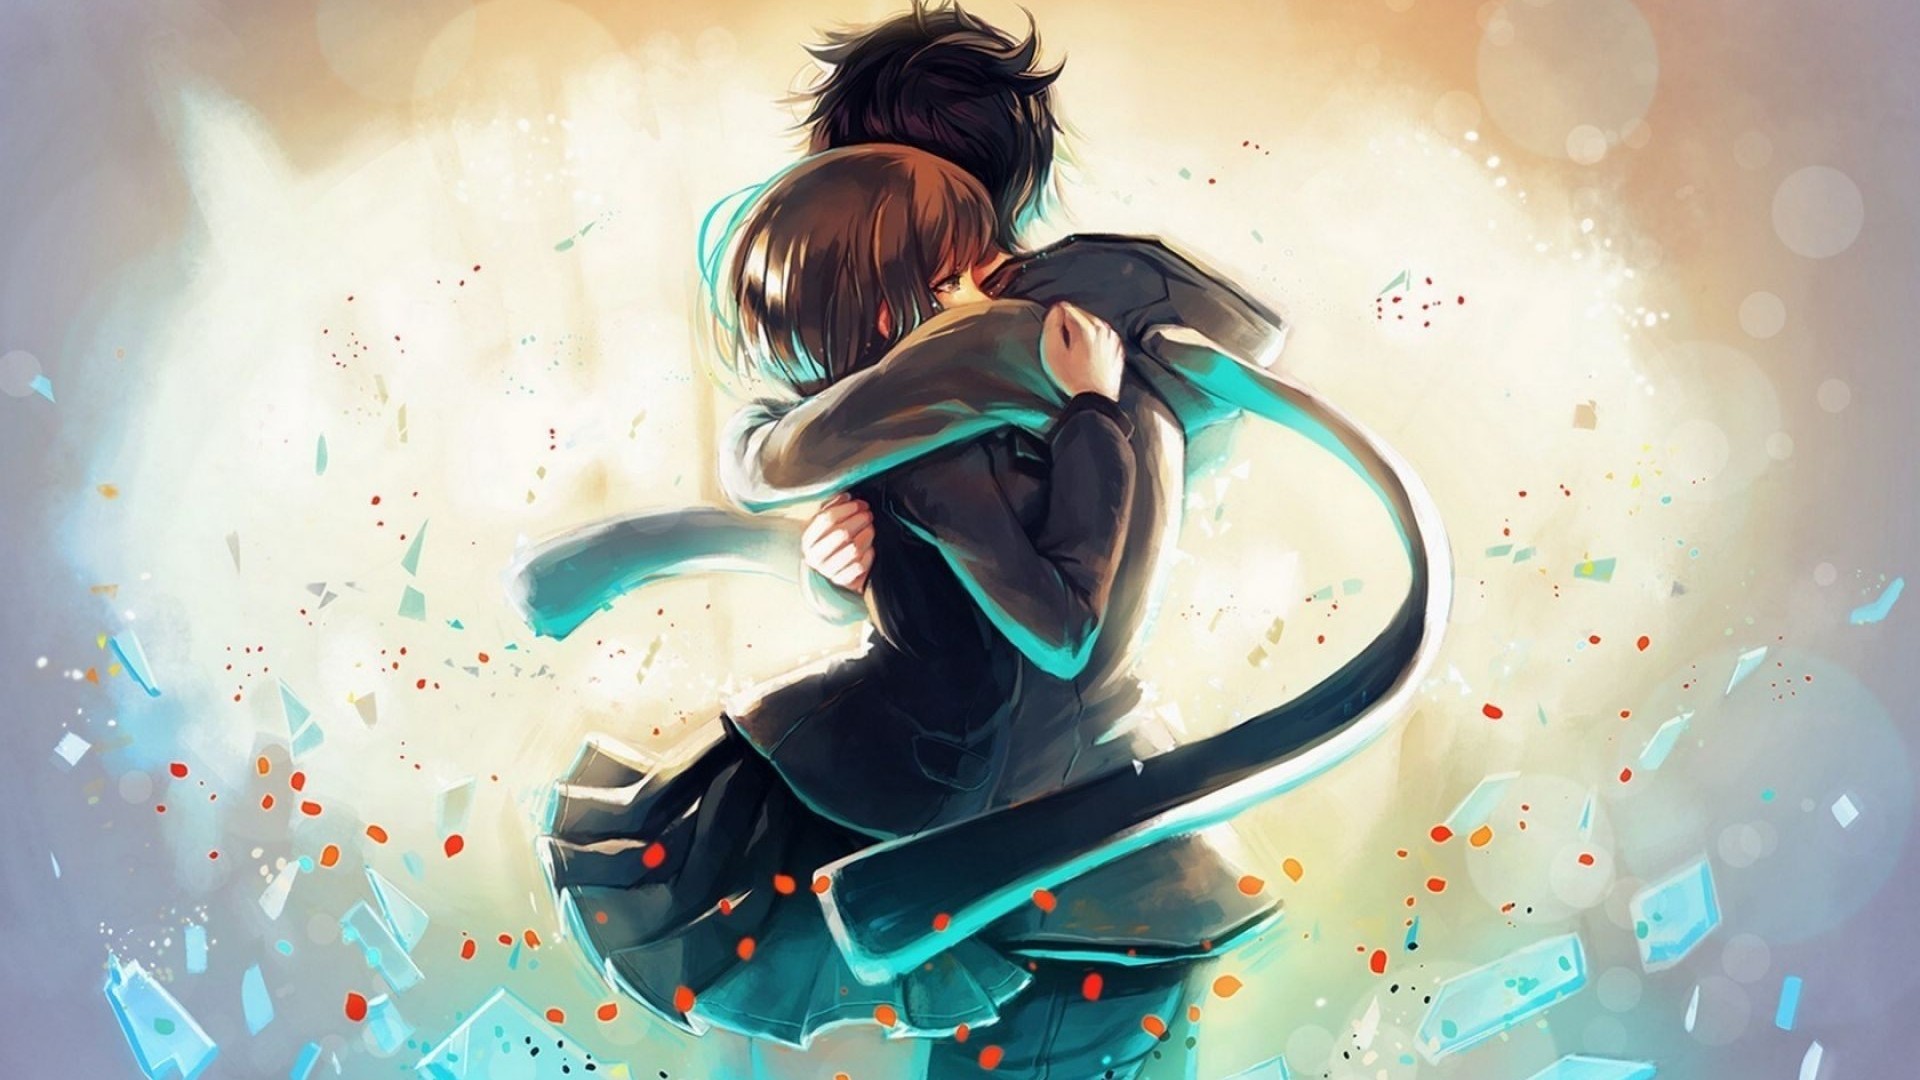 Free Wallpaper Anime Couple Wallpaper Hd For Iphone